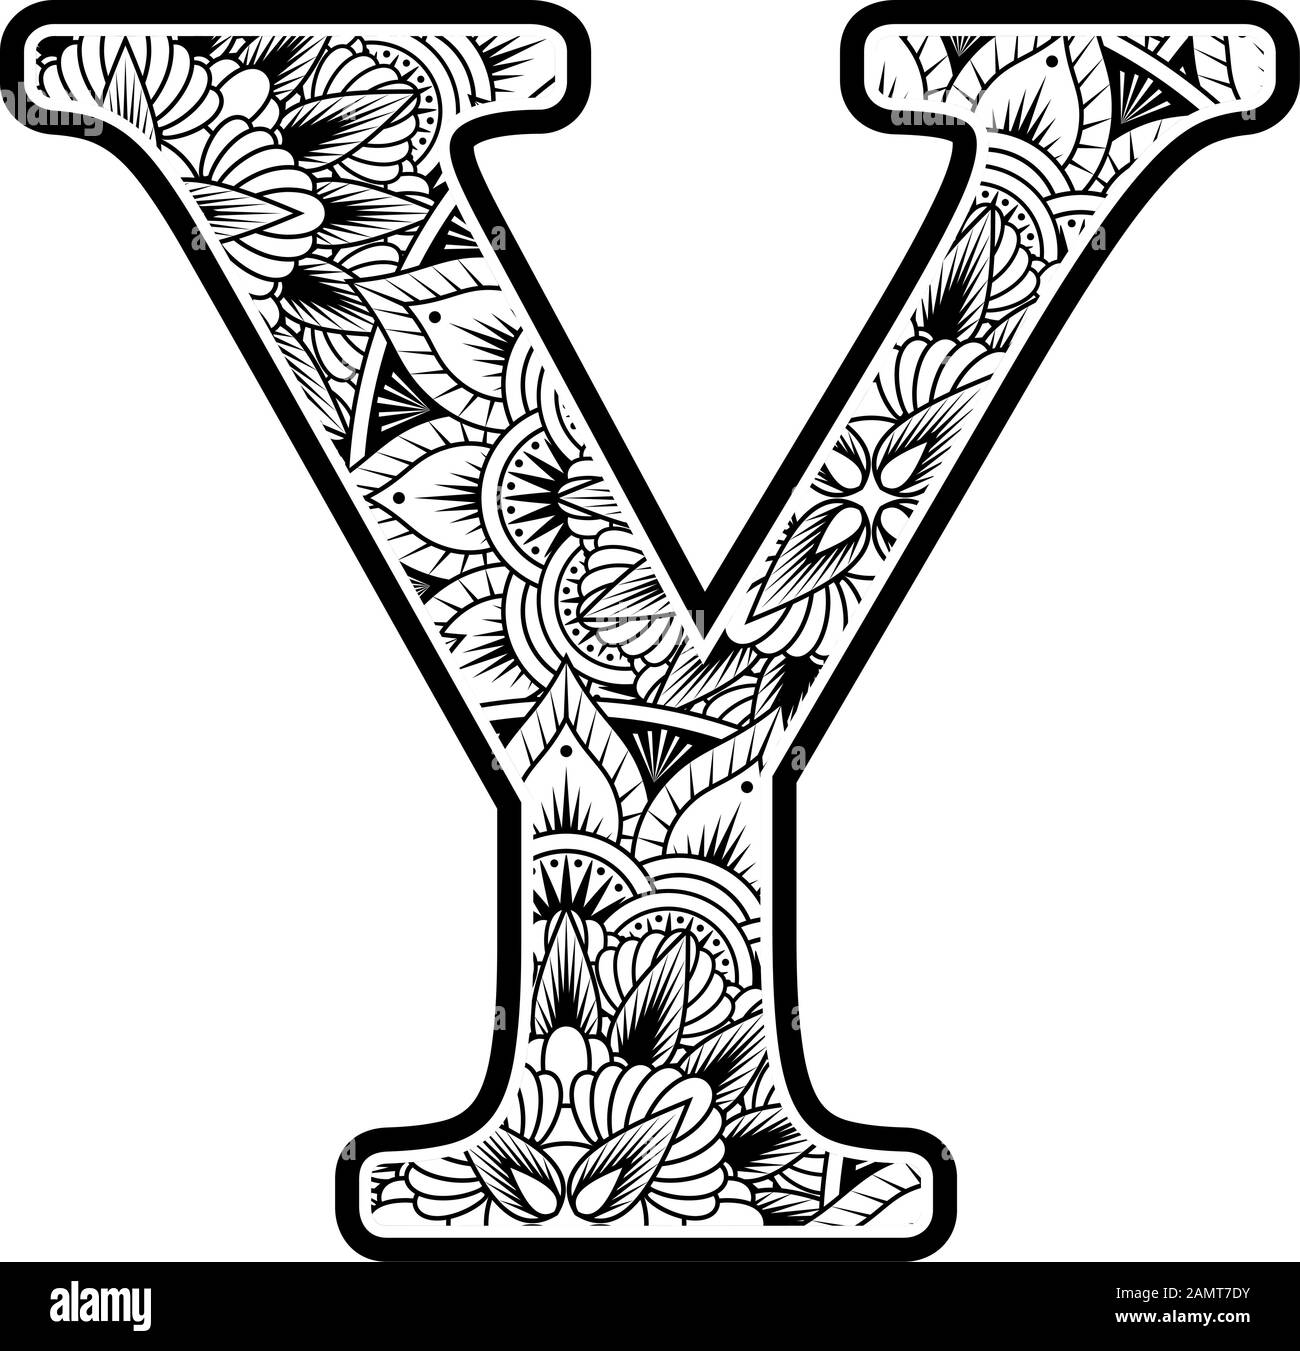 capital letter y with abstract flowers ornaments in black and white. design inspired from mandala art style for coloring. Isolated on white background Stock Vector